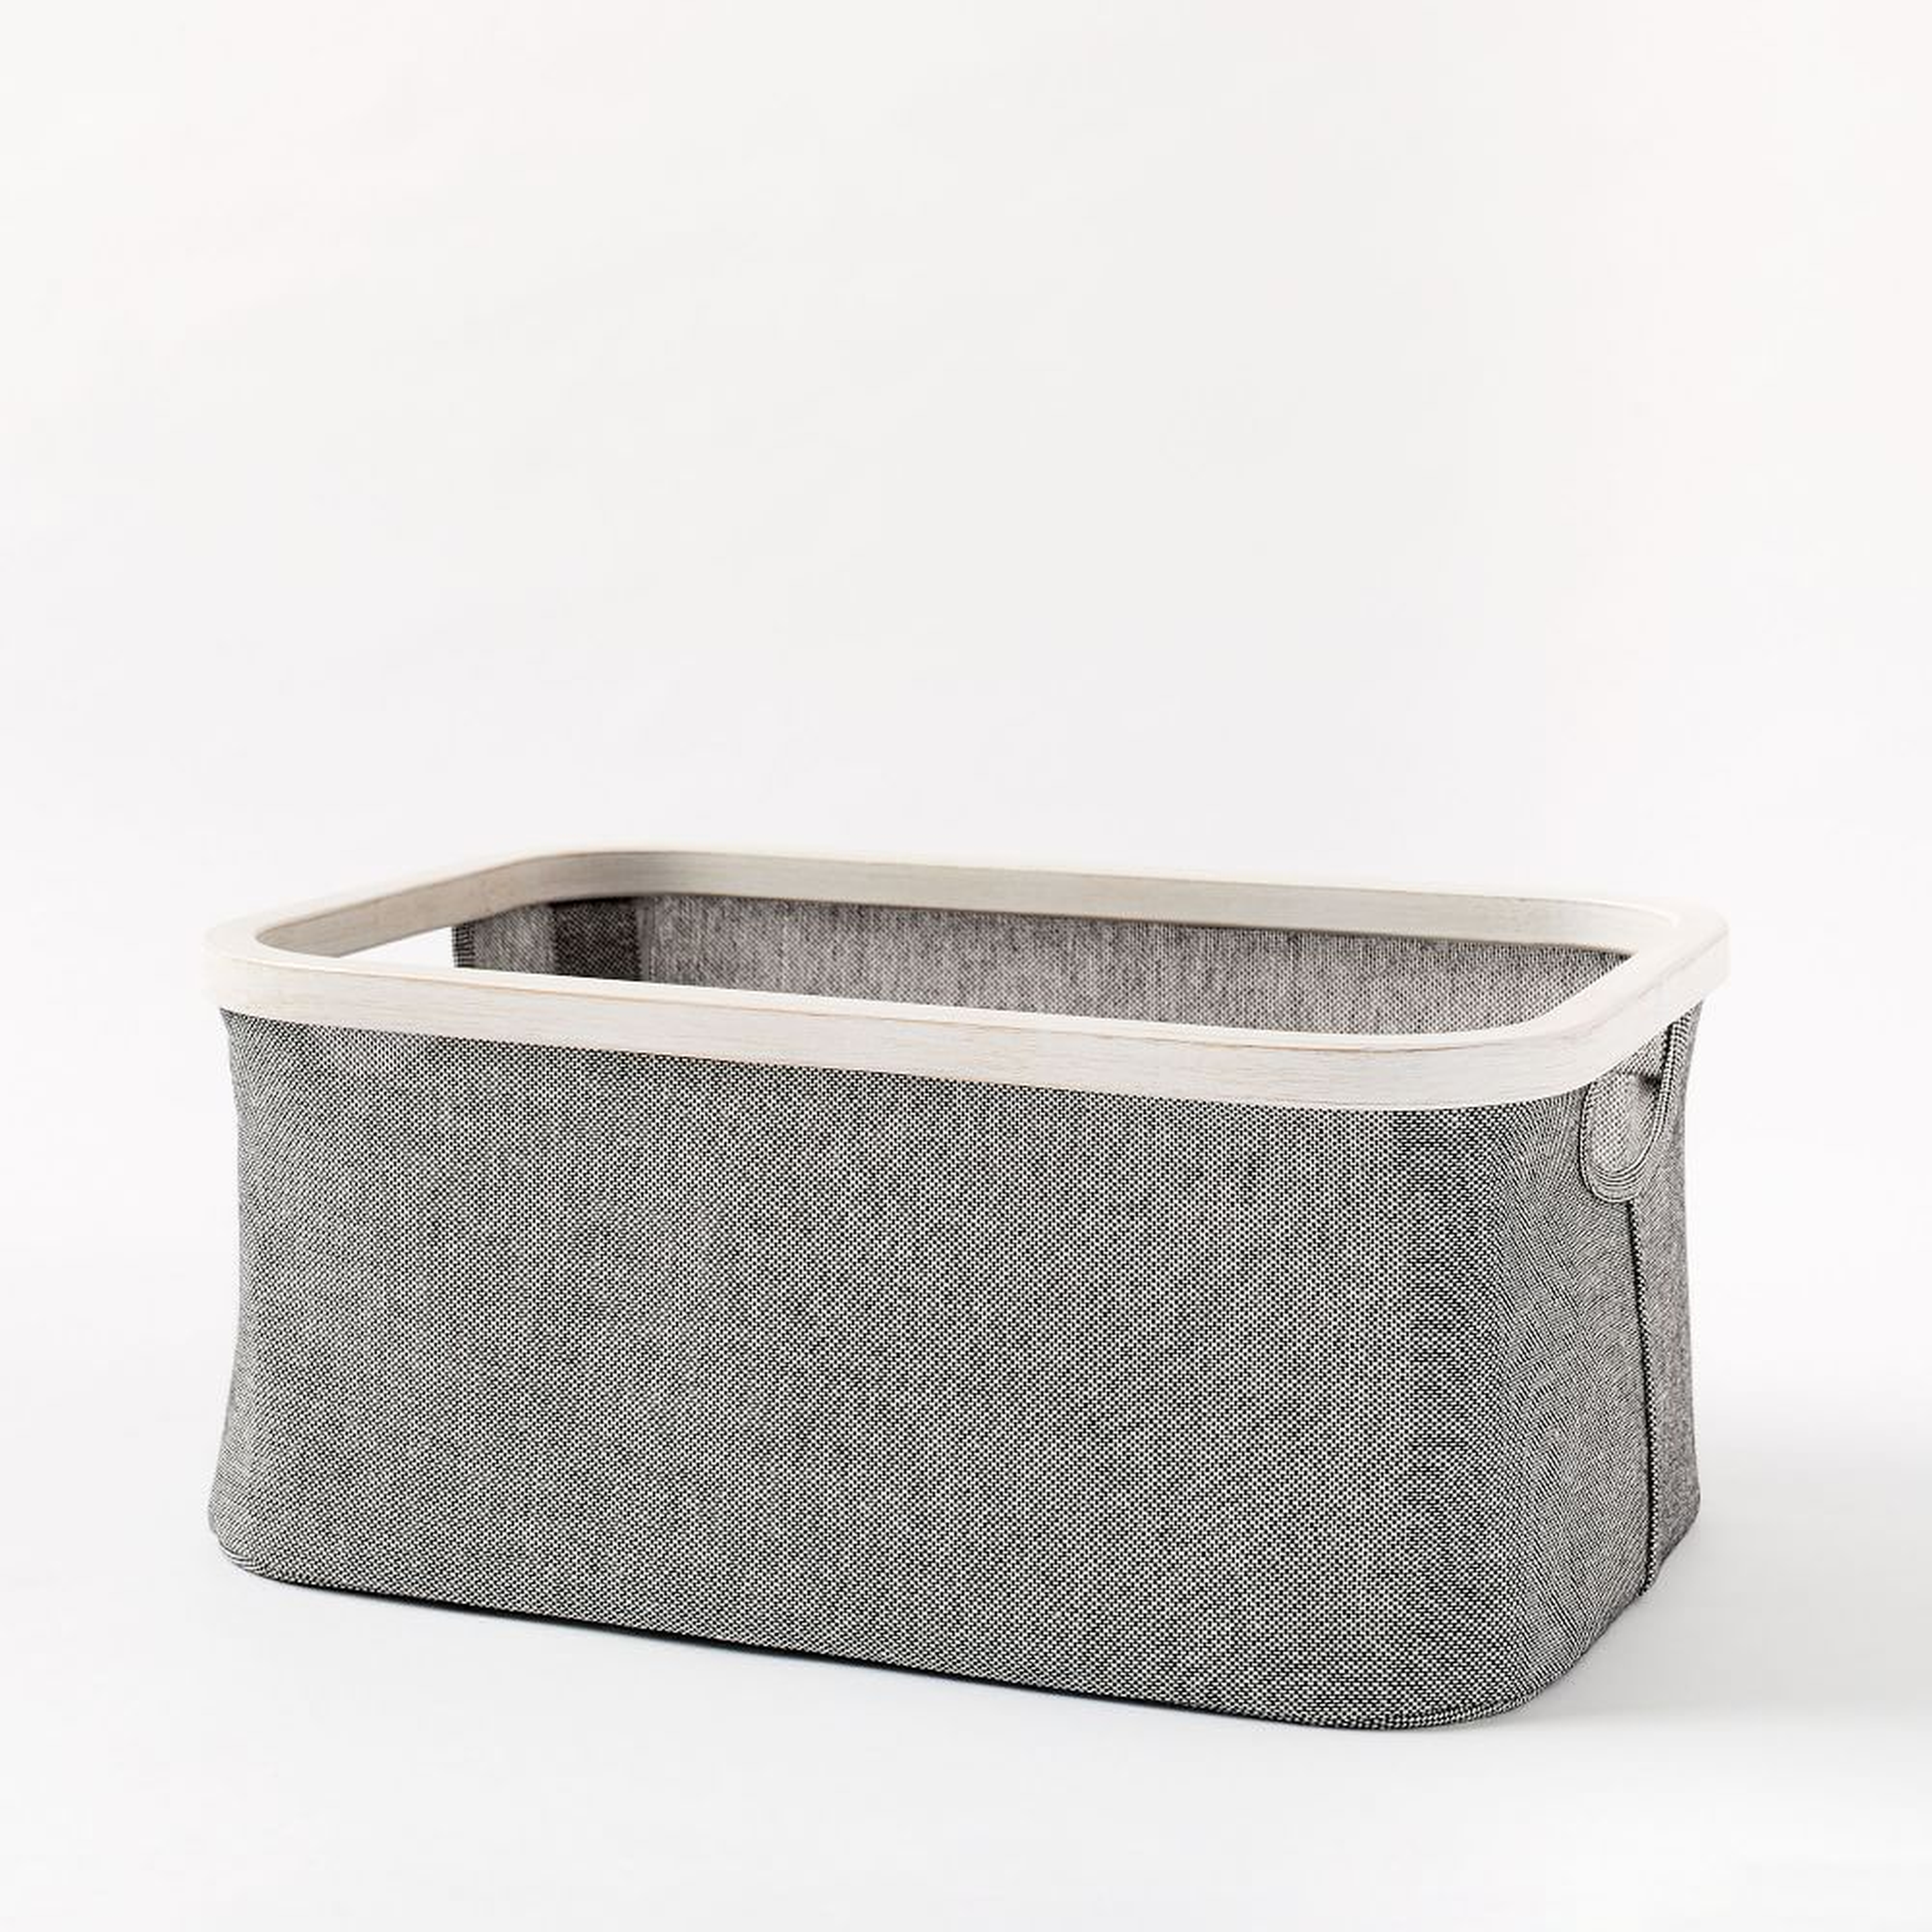 Bamboo Storage Basket, Gray Washed, Small - West Elm